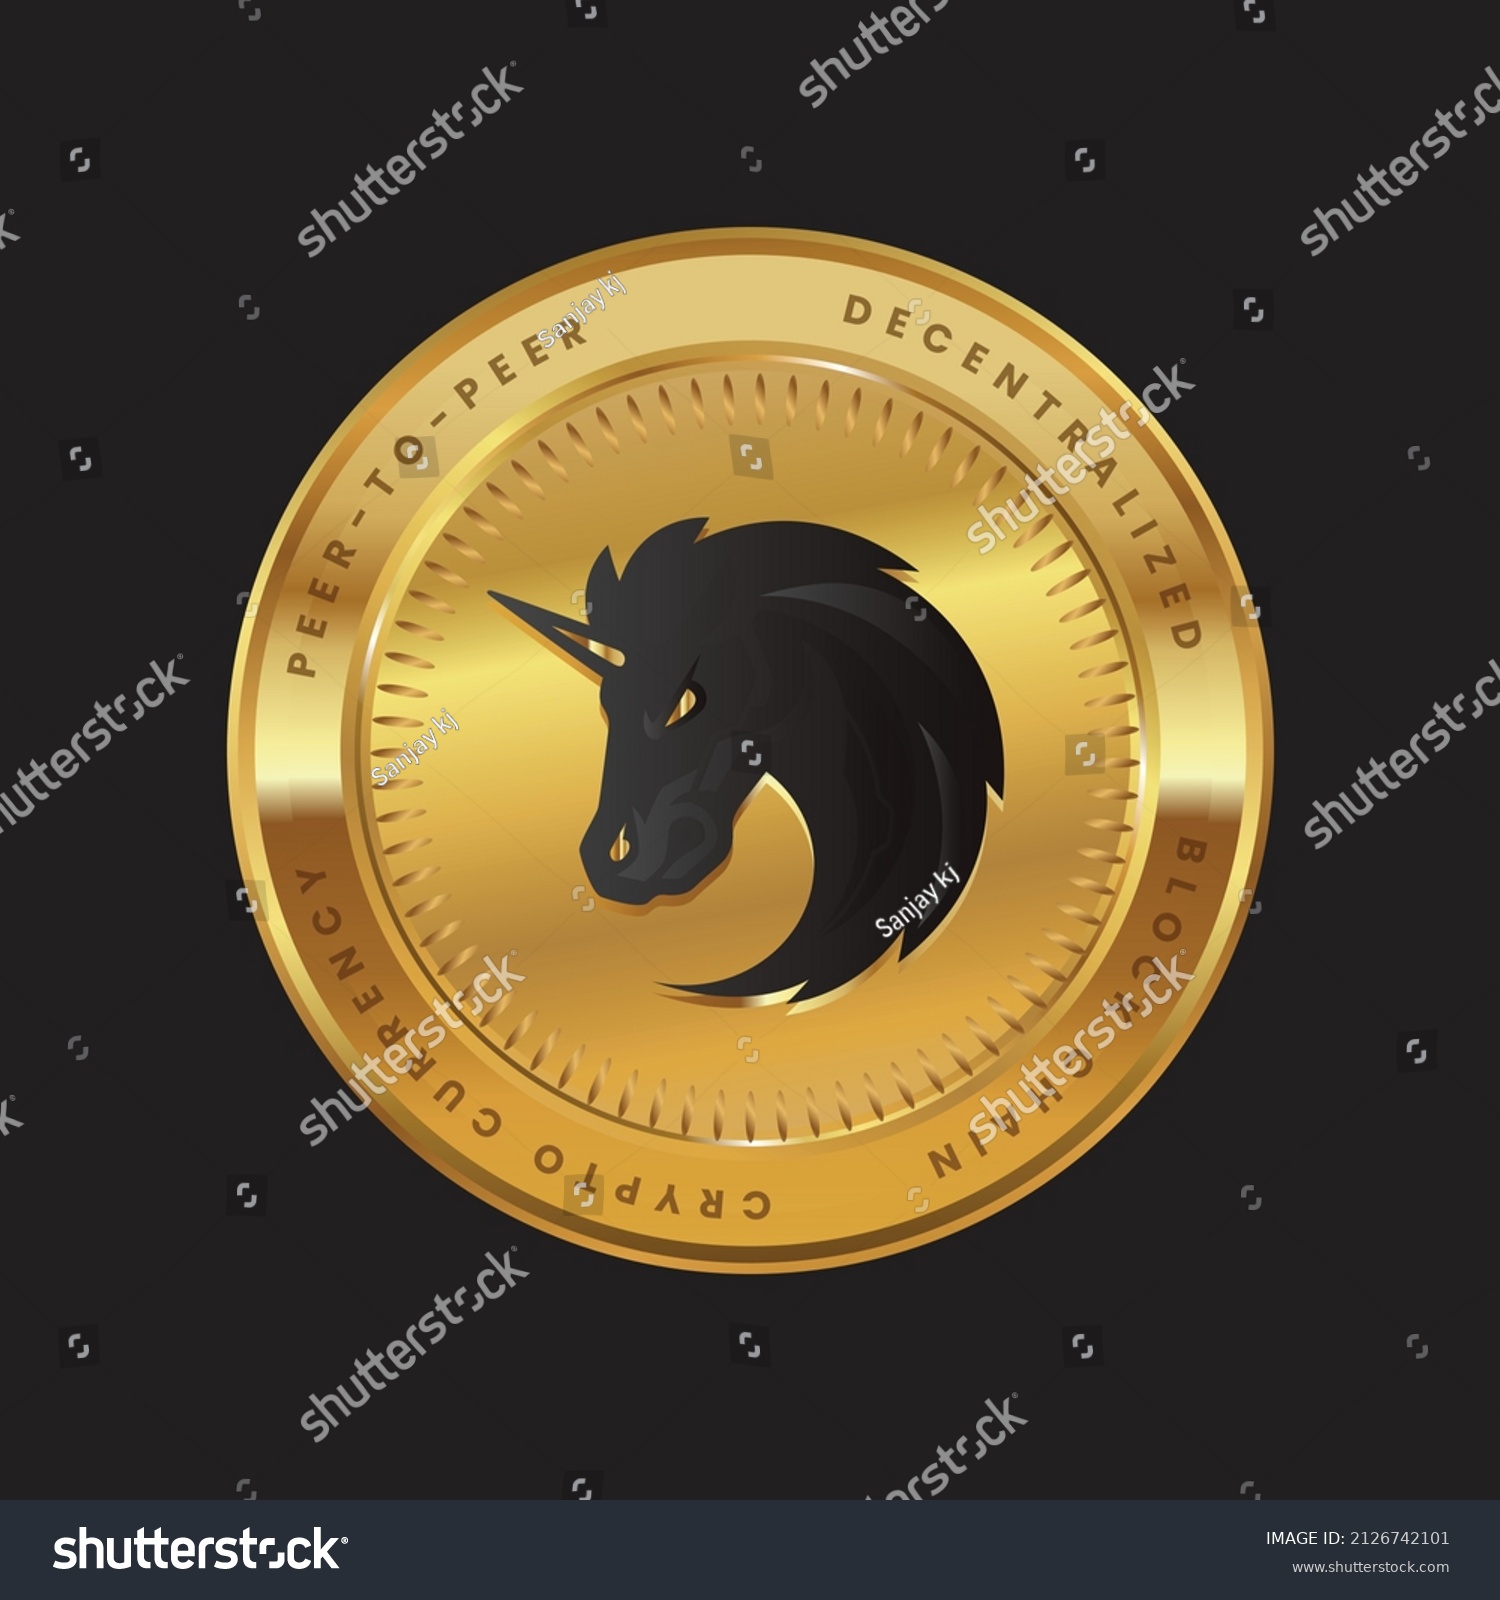 SVG of Vector illustration of 1 inch Network crypto currency blockchain logo isolated on Black background on gold coin. Block chain 1inch logo for web or print.  svg